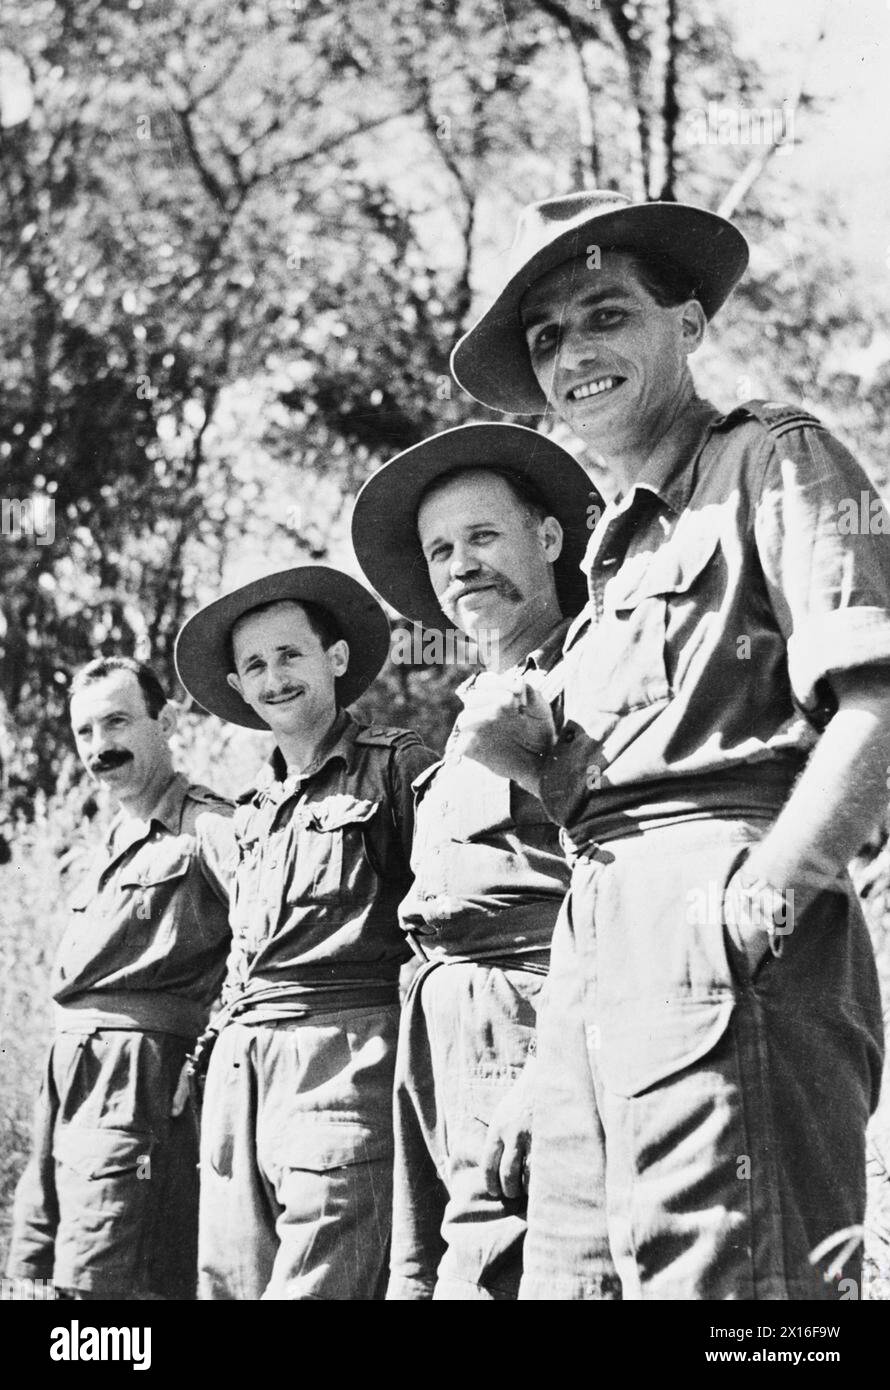 POLISH OFFICERS IN THE ROYAL WEST AFRICAN FRONTIER FORCE - Polish officers serving with the 1st Battalion, Gambia Regiment (6st West African Infantry Brigade, 81st West African Division) during the Third Arakan Campaign.Left to right:Lieutenant Adam Grzywacz, D and X Companies; Lieutenant Wiesław Bulkowski (or Bułkowski), Mortar Platoon; Captain Jan K. Żeleźnik MC, Mortar Platoon and A Company; Major Stanisław Lisiecki, the CO of the B Company Polish Army, Royal West African Frontier Force, Royal West African Frontier Force, 81st West African Division, Royal West African Frontier Force, 81st W Stock Photo